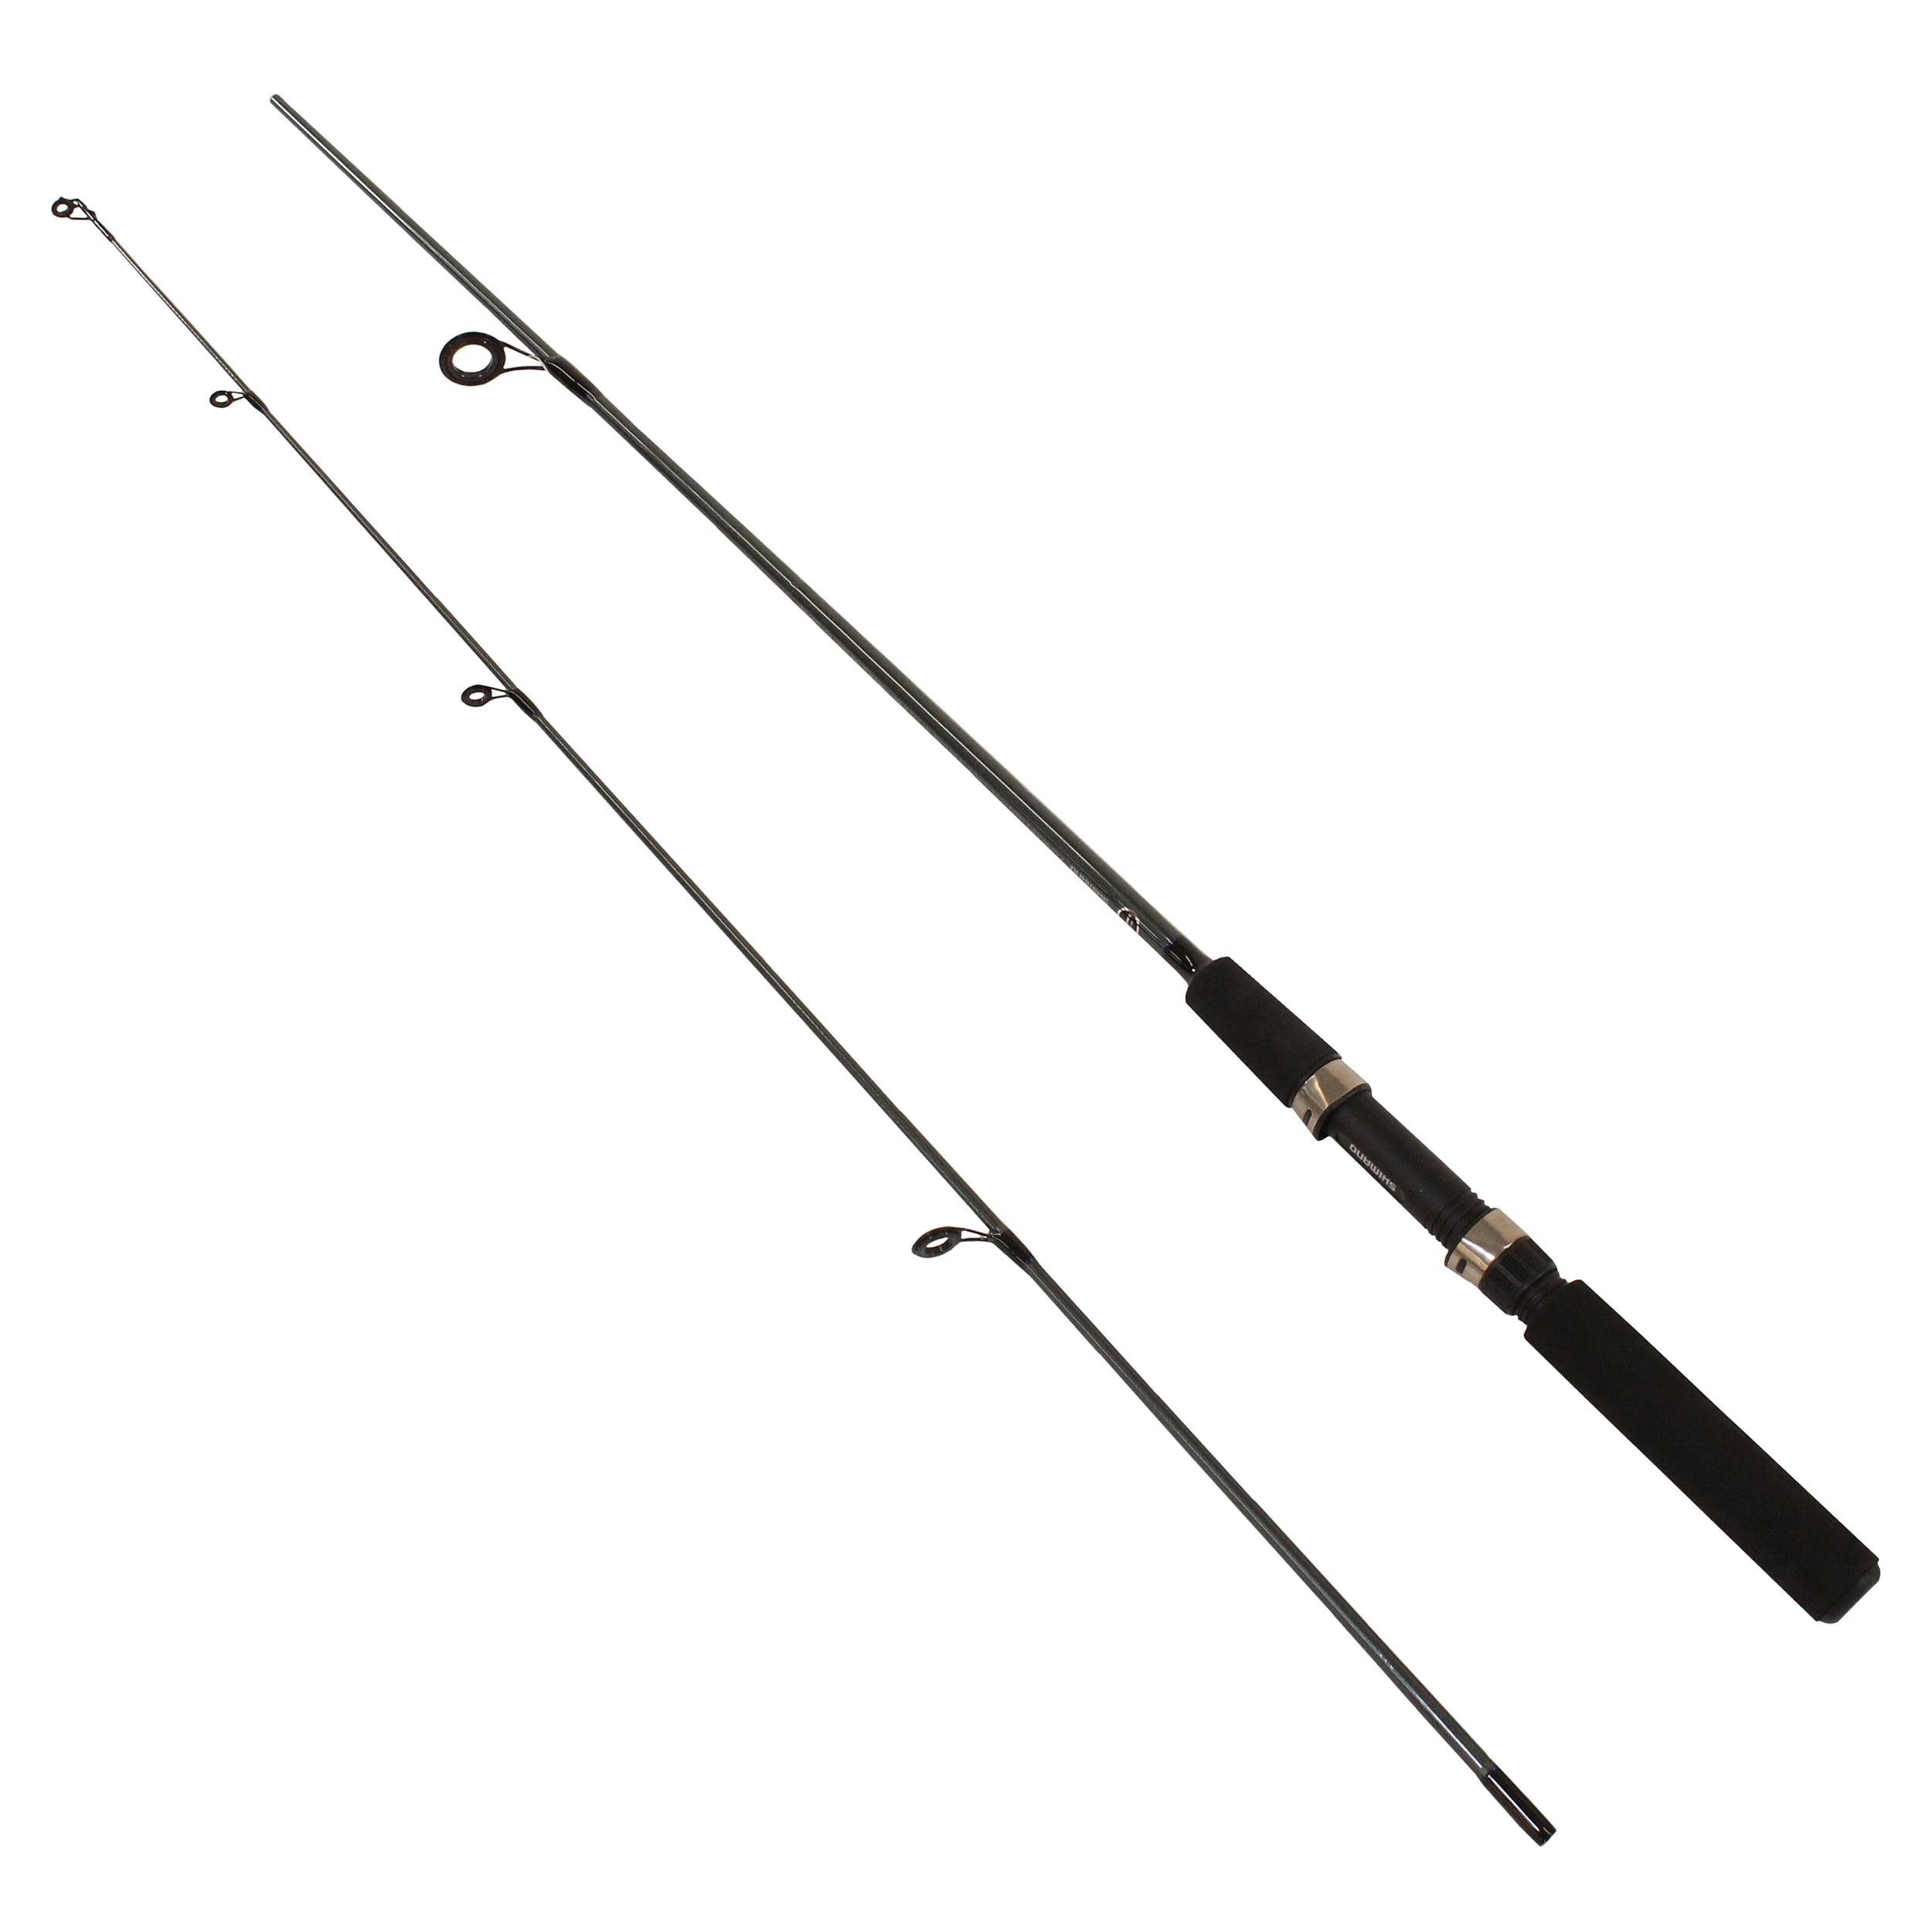 Shimano FX Spinning Rod 7' Length, 2pc Rod, 10-20 lb Line Rate, 1